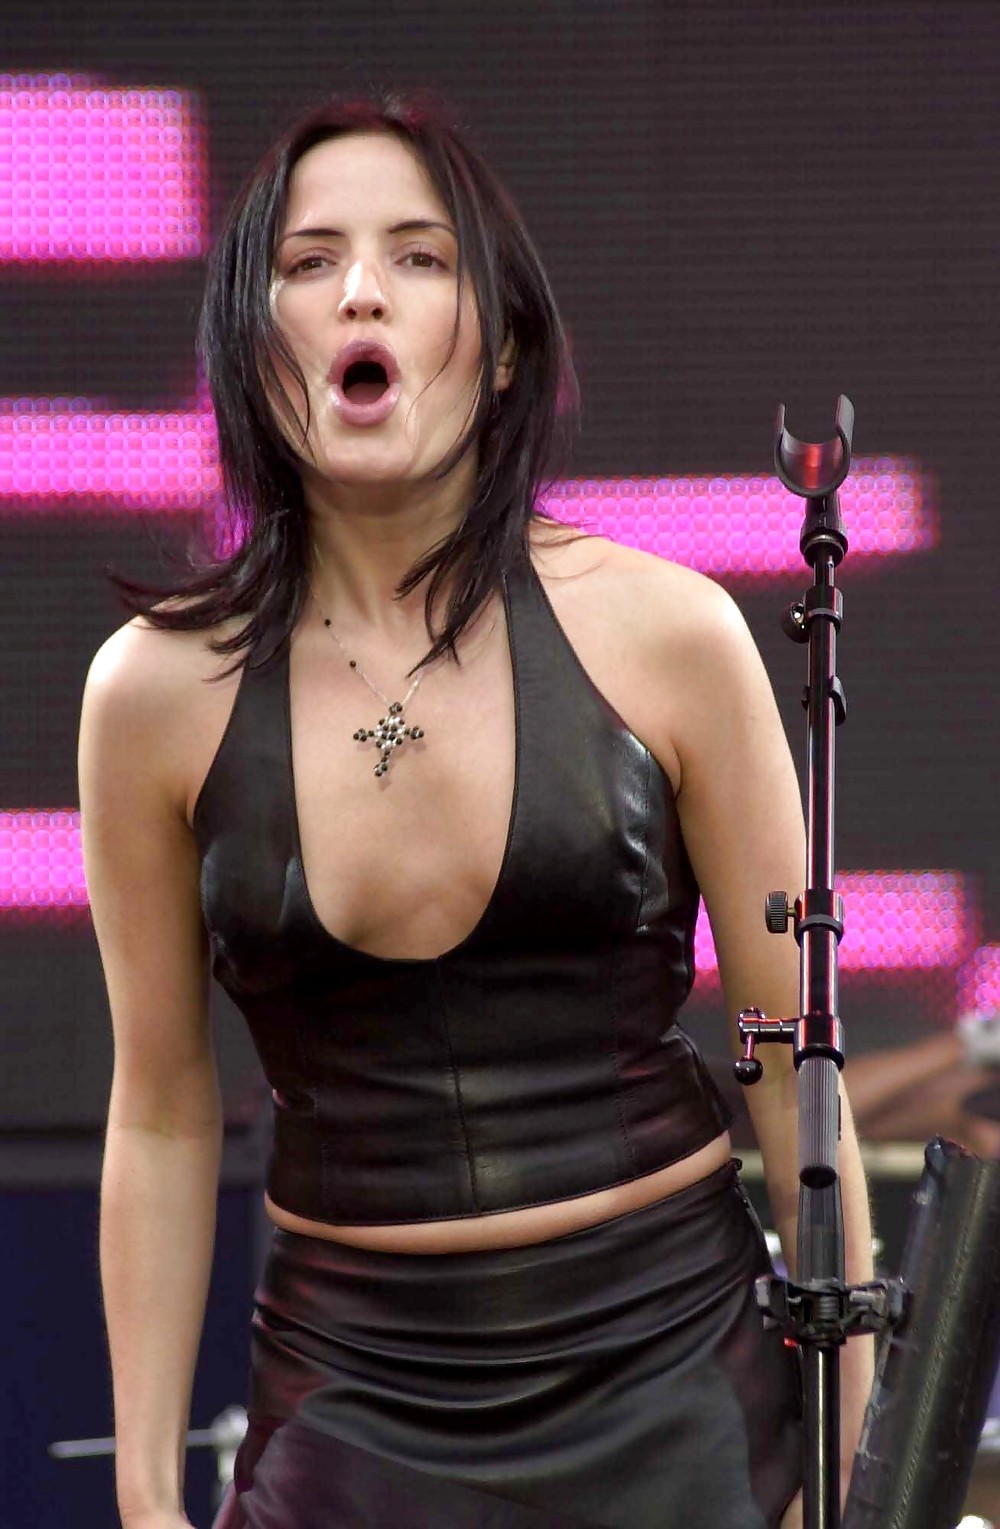 Singer andrea corr, oops, pokies, seethrough+other hot pics
 #36341779